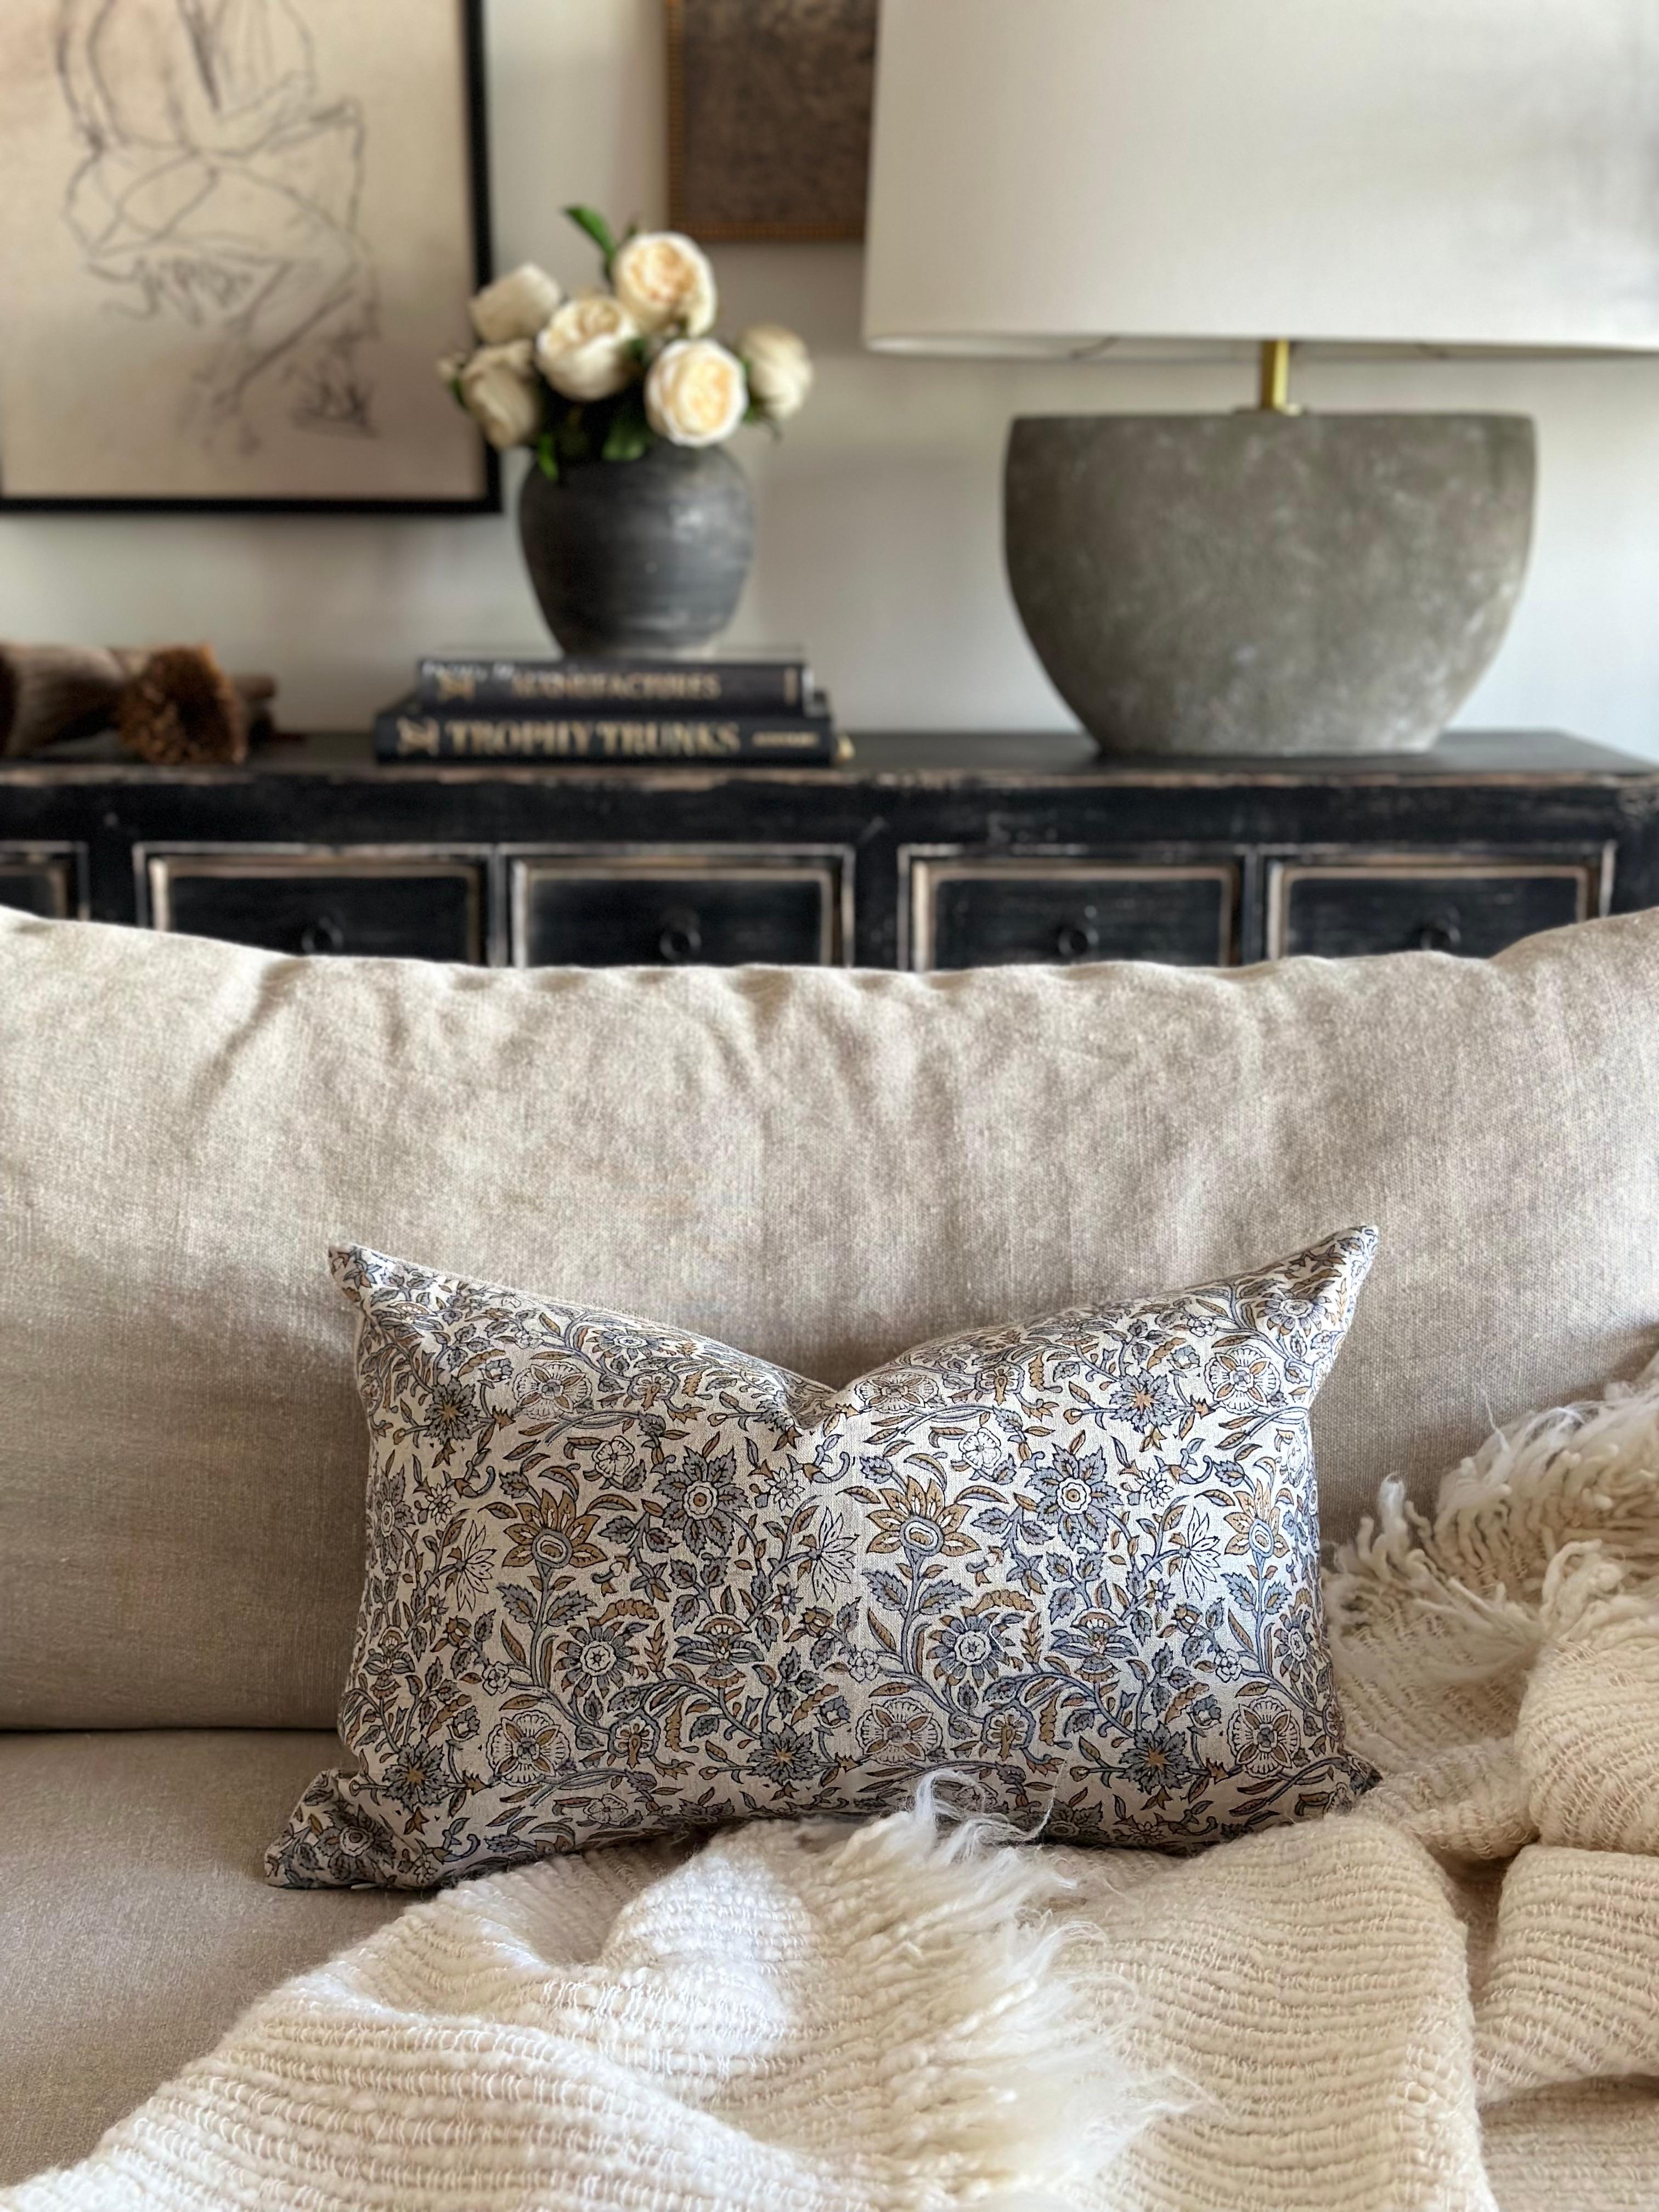 Our latest collection of beautiful hand blocked and linen pillows can be arranged to create beauty and bring a pop of color to your room while adding softness!   This item is made to order and can vary in lead times.
Includes a feather down